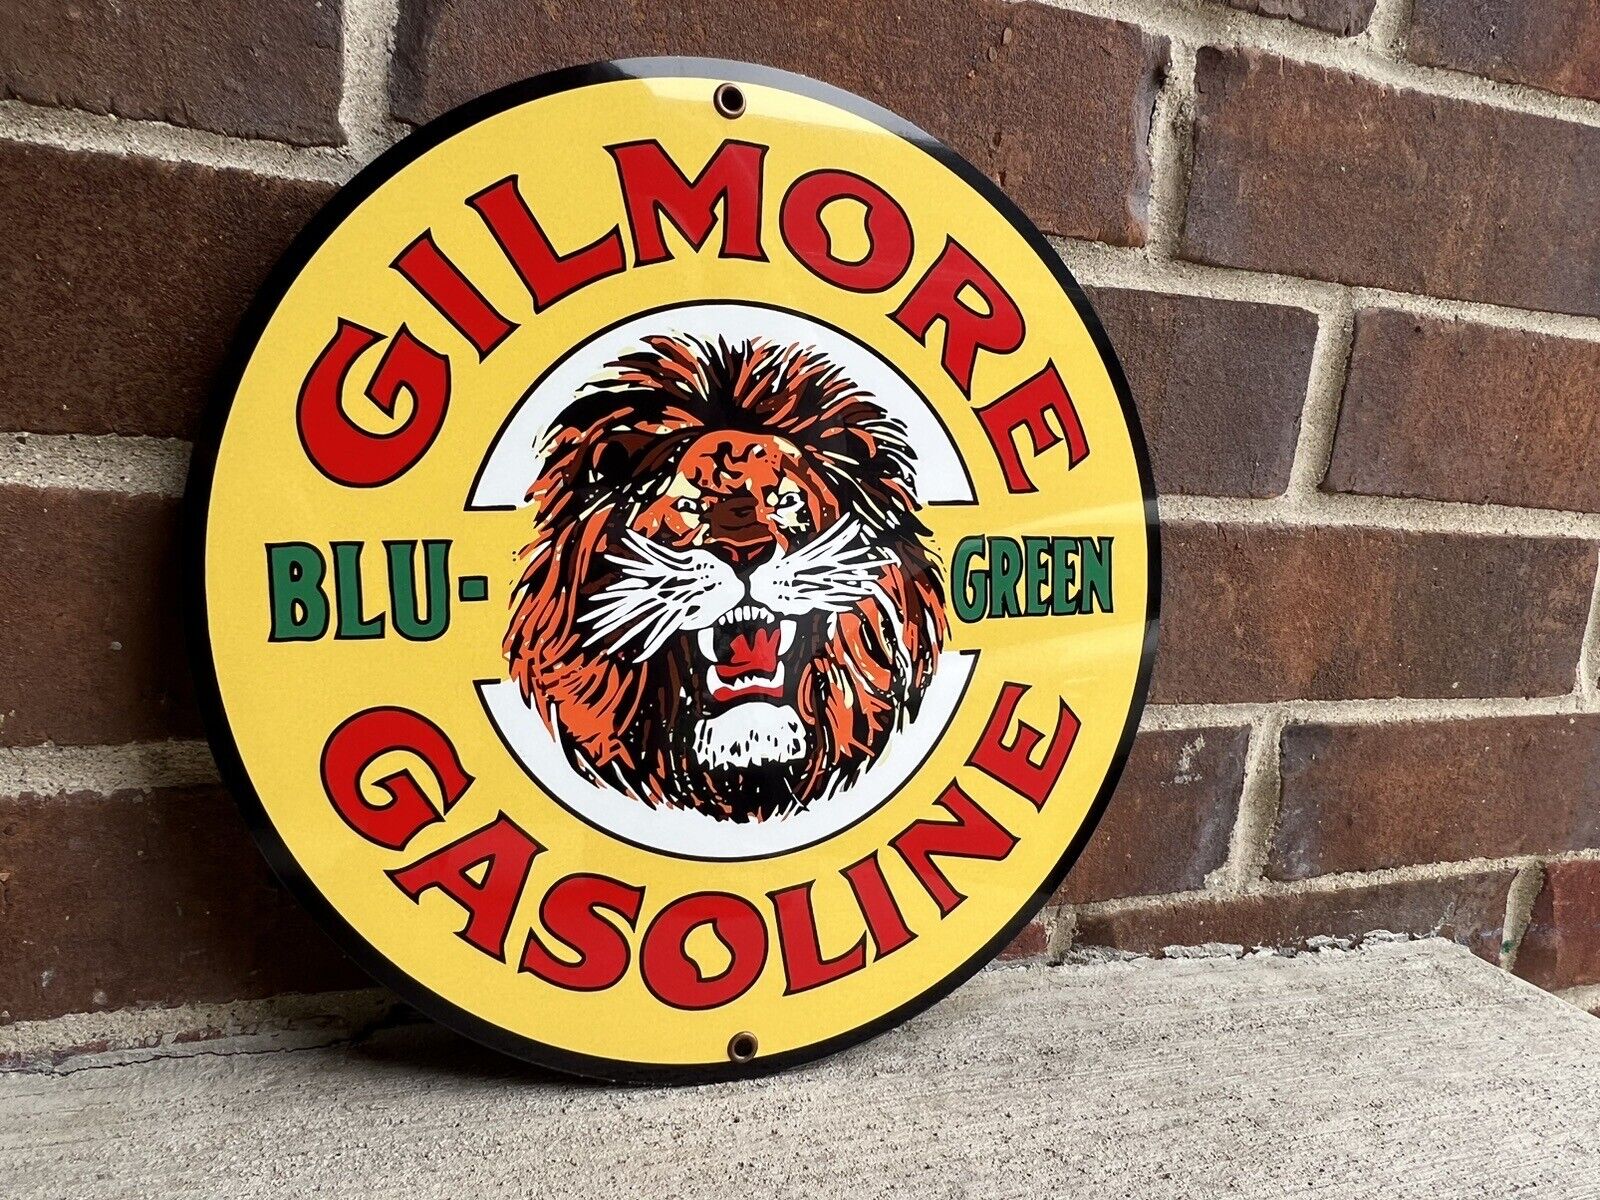 Gilmore gasoline vintage advertising Style sign oil gas round metal